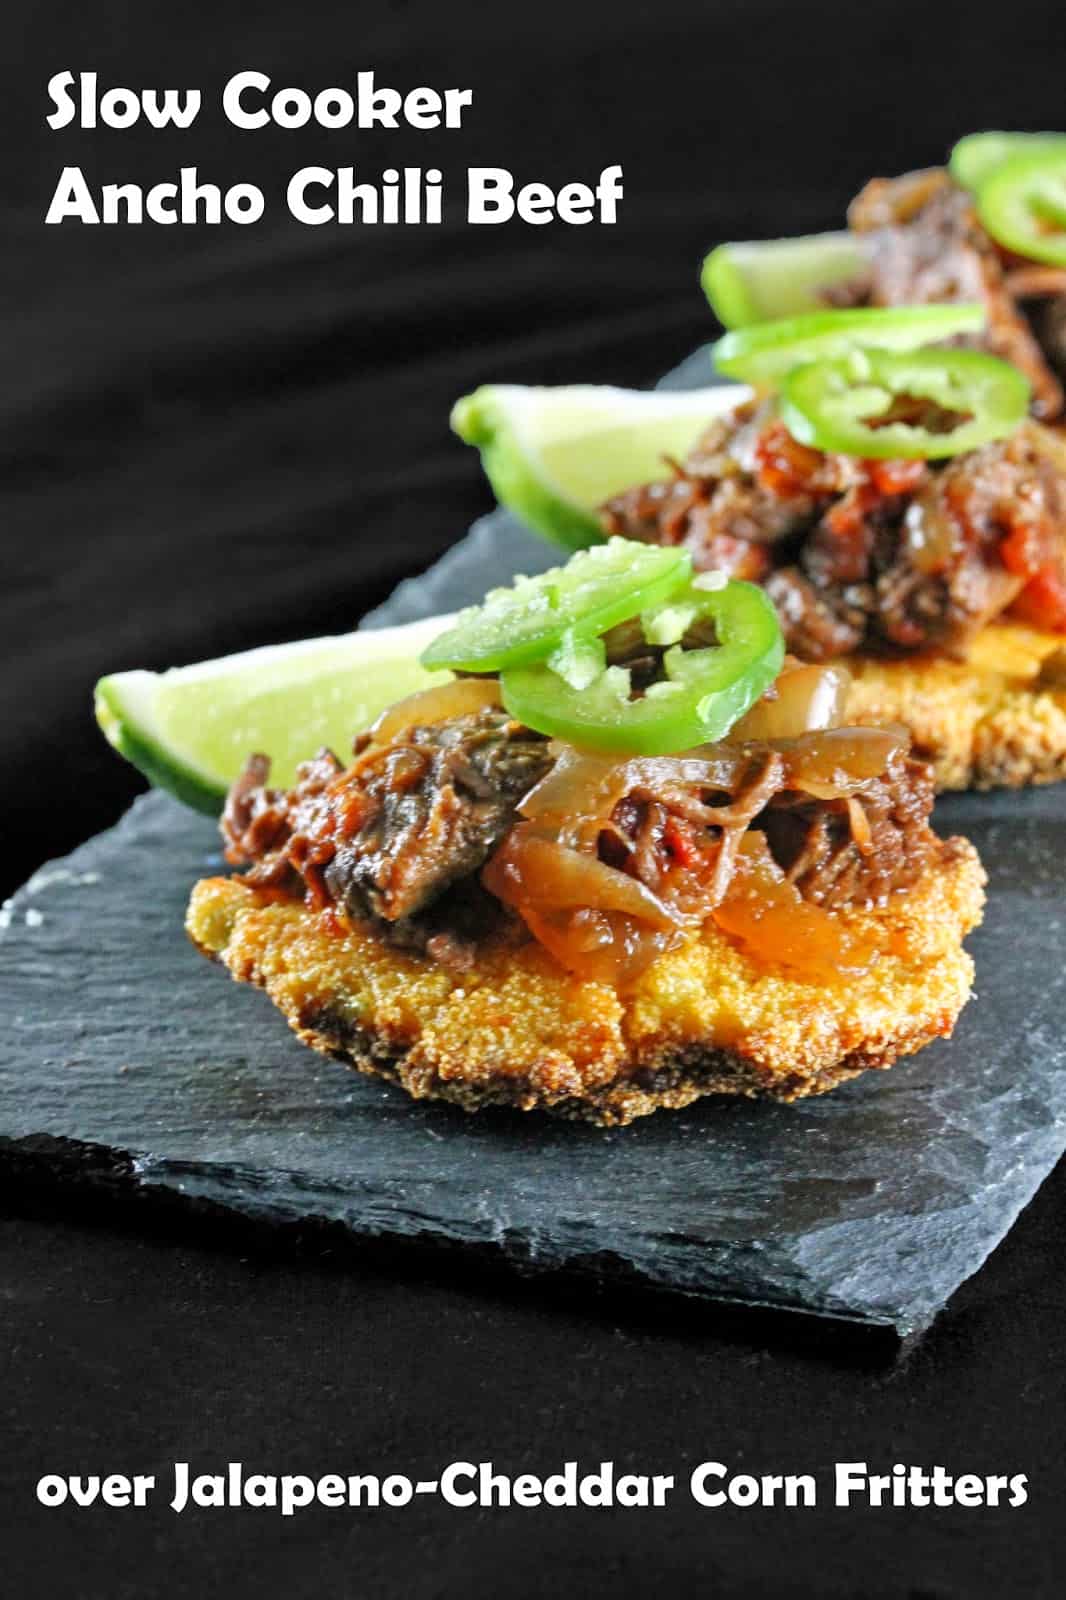 Slow Cooker Beef and Corn Fritters a black rock server.